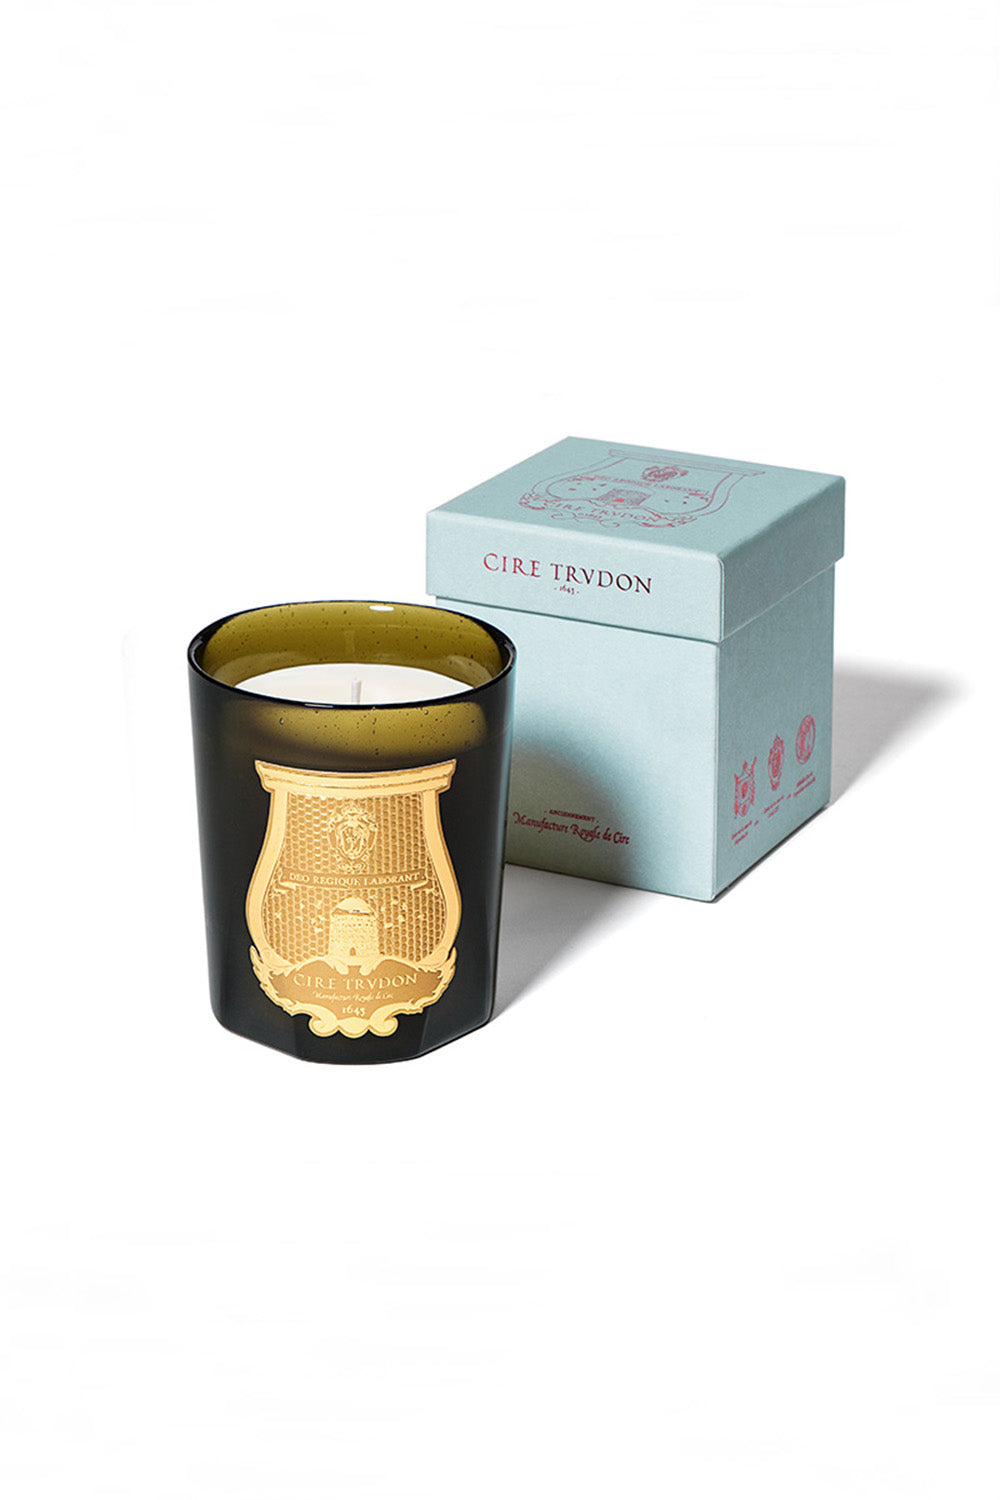 Cire Trudon Candles for Sale Online | Envoy of Belfast